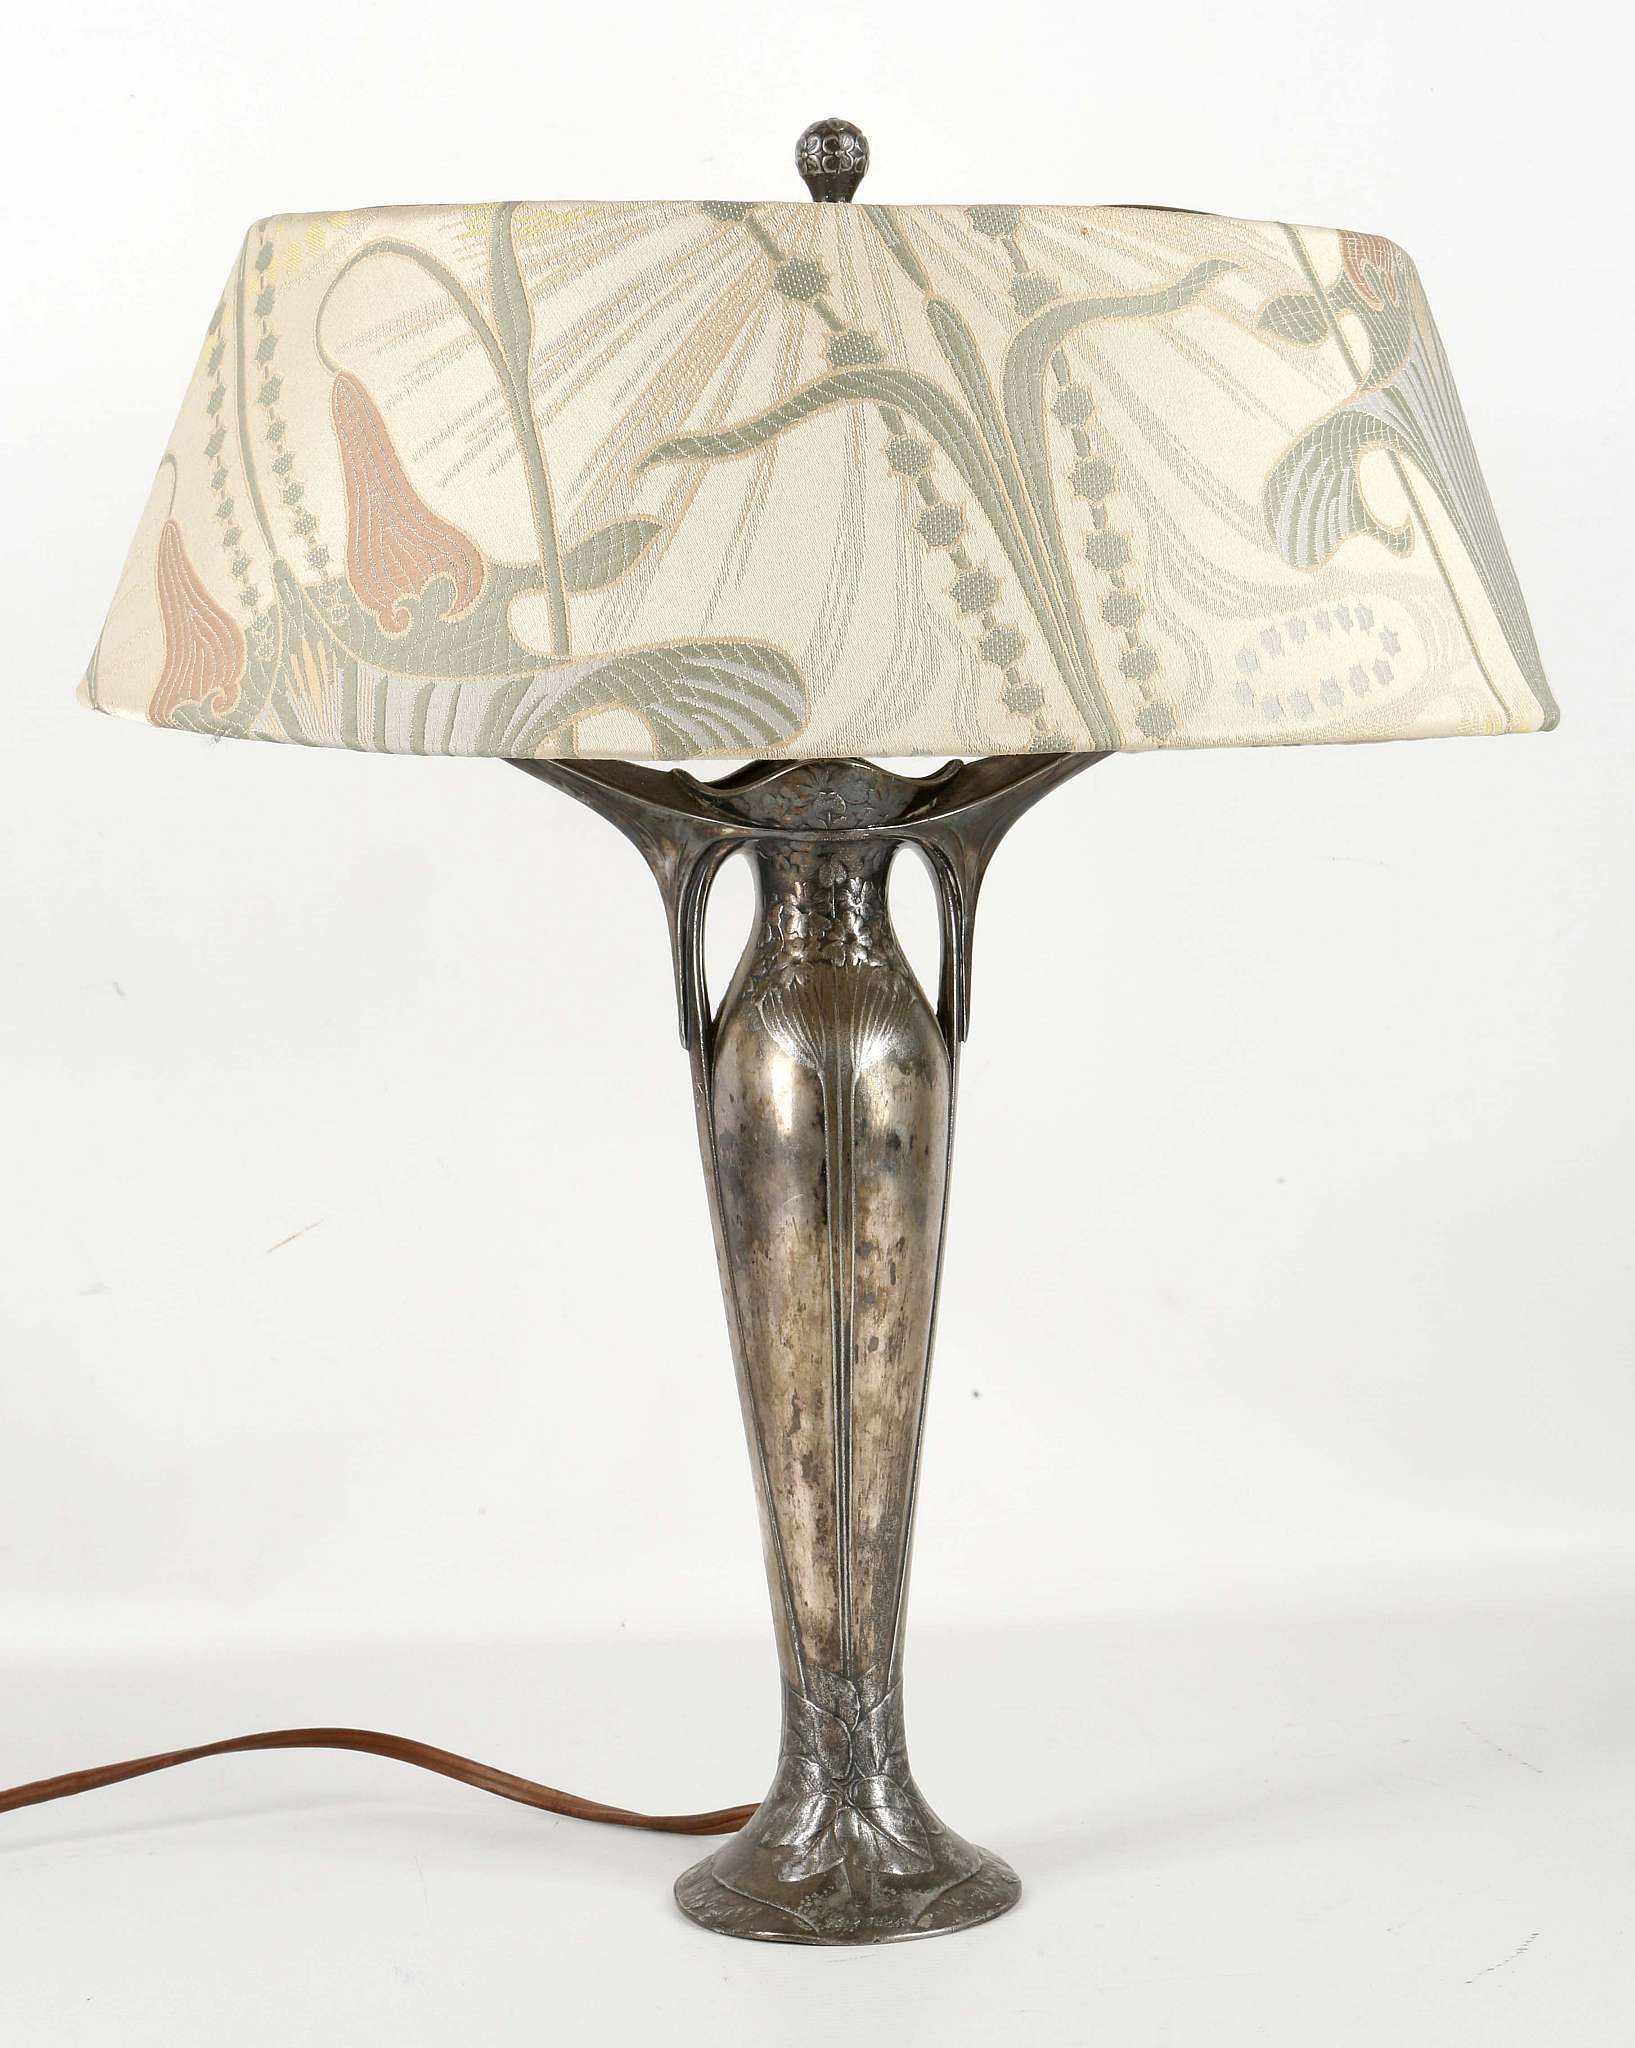 ATTRIBUTED TO OSIRIS, AN ART NOUVEAU PERIOD METAL TABLE LAMP, with embossed decoration, (46cm high)